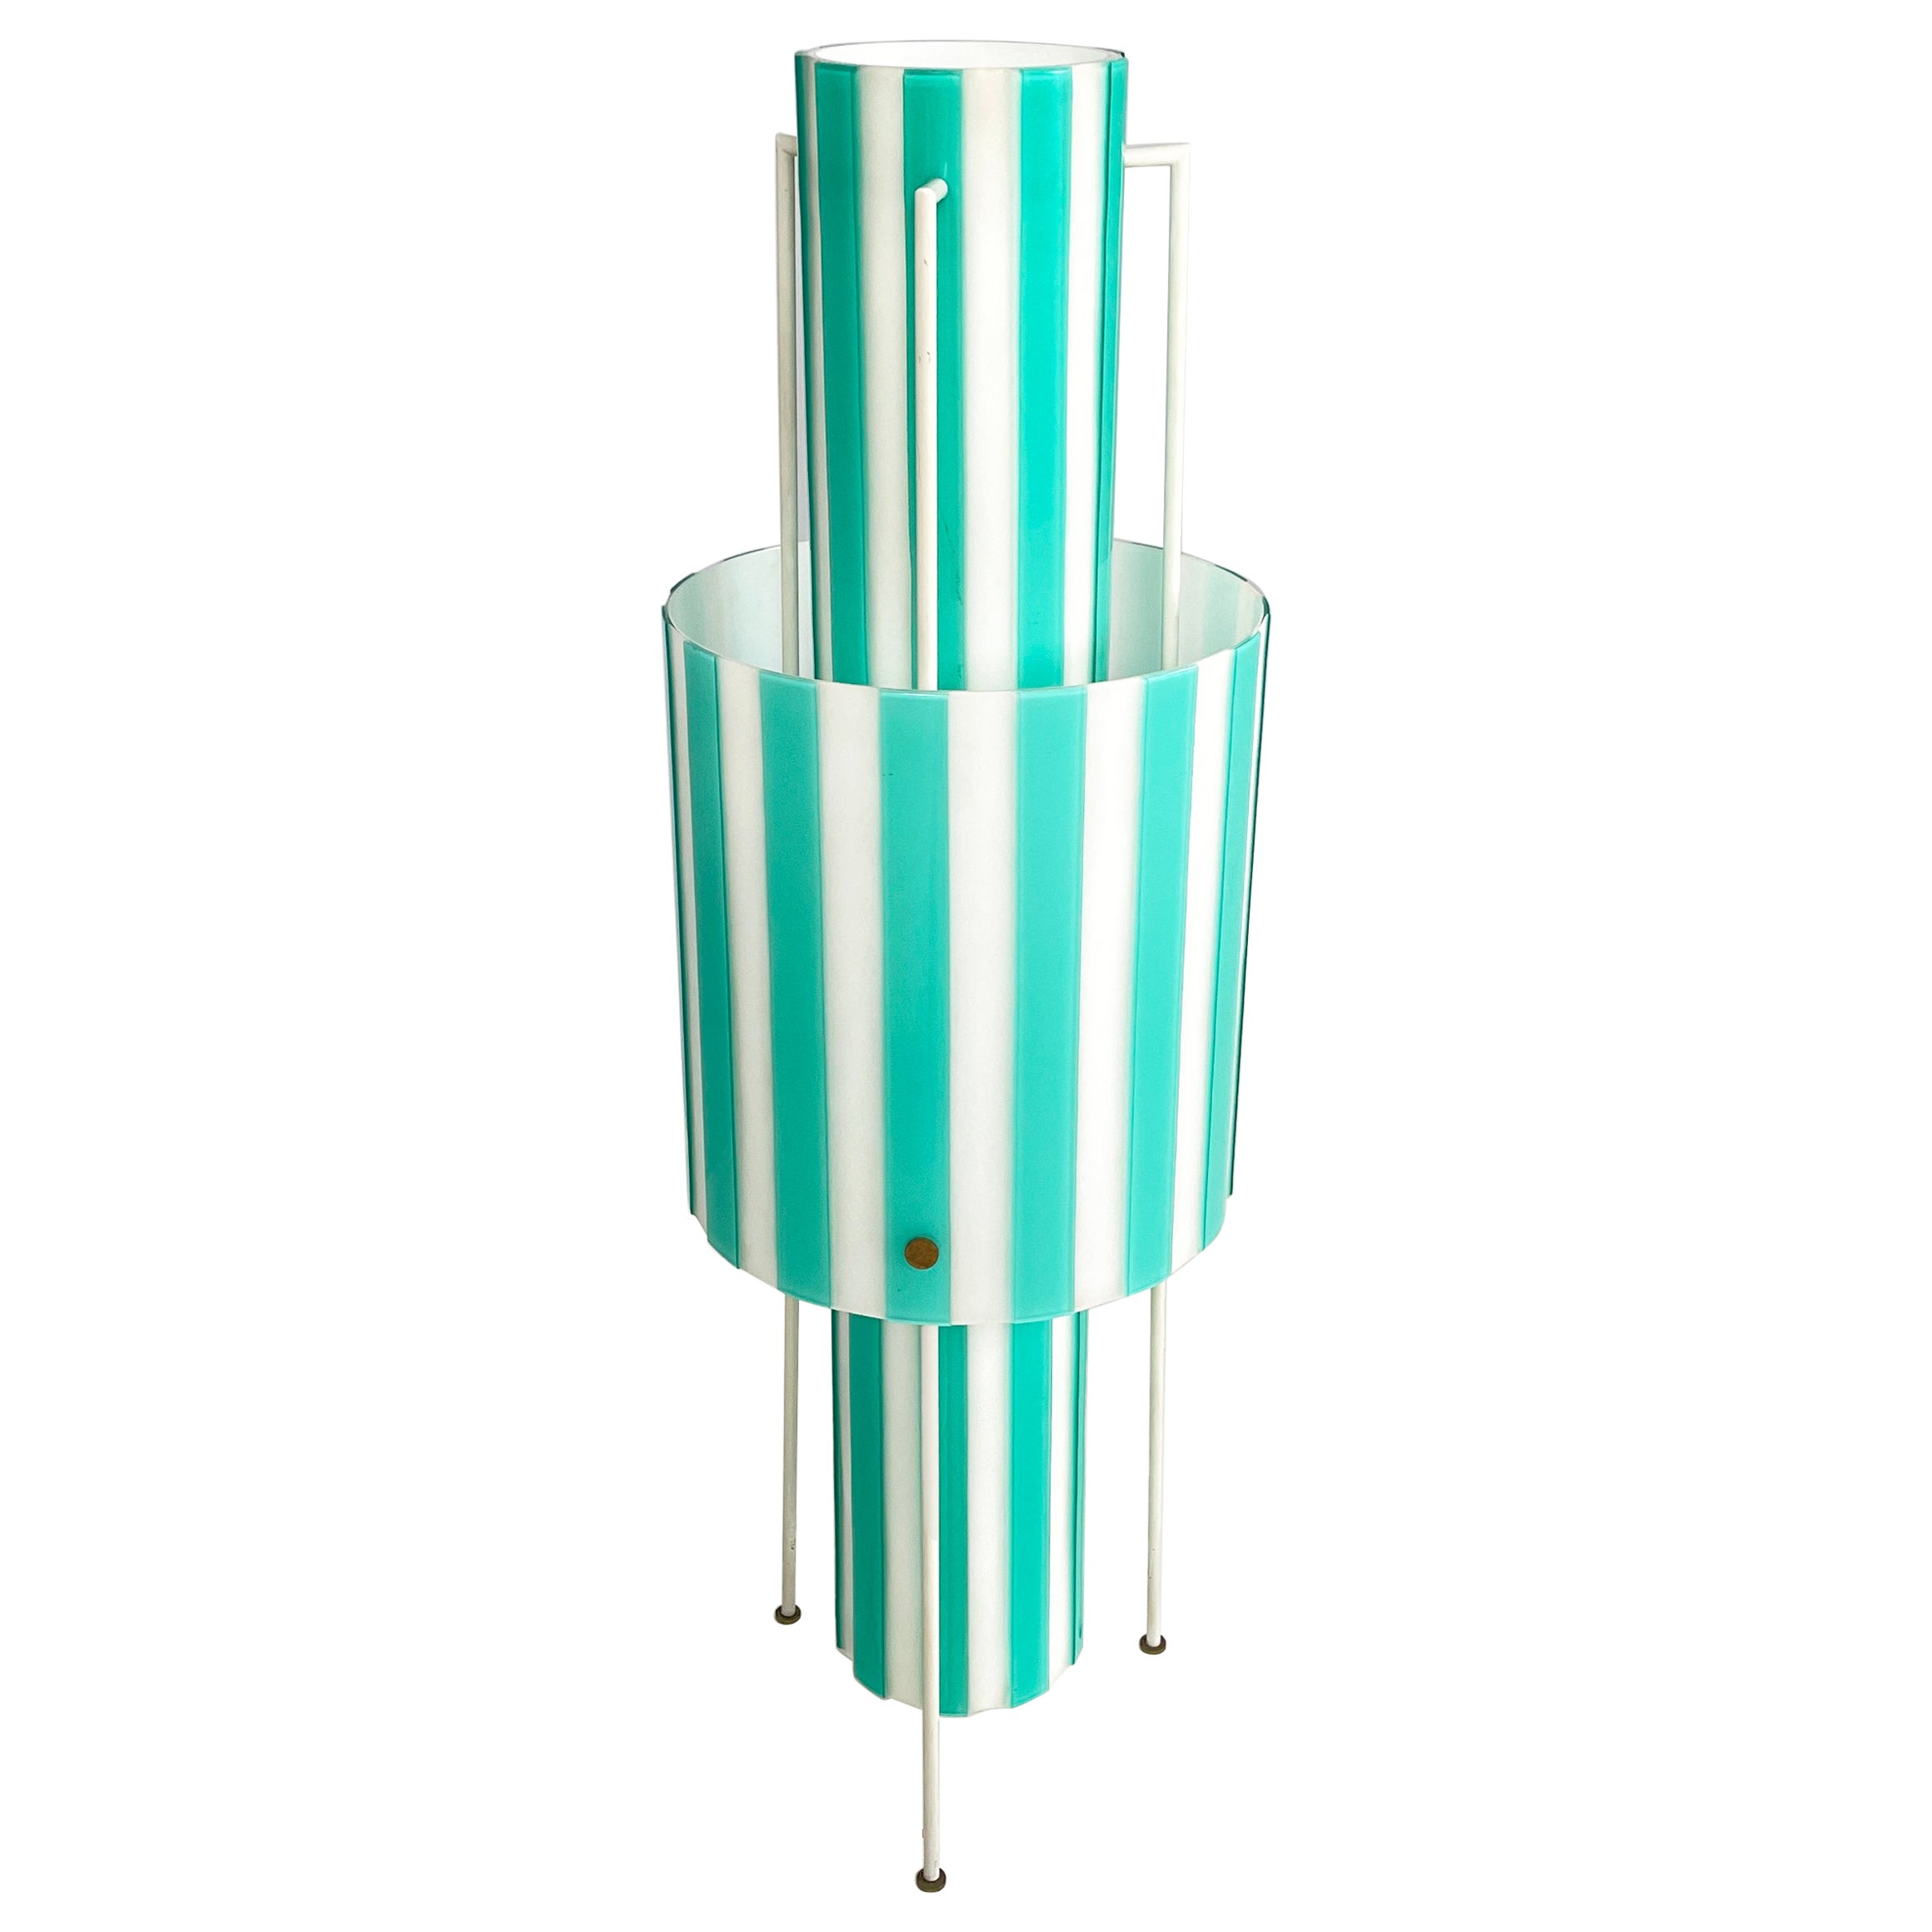 Italian mid-century Floor lamp in white and light blue glass with metal, 1950s